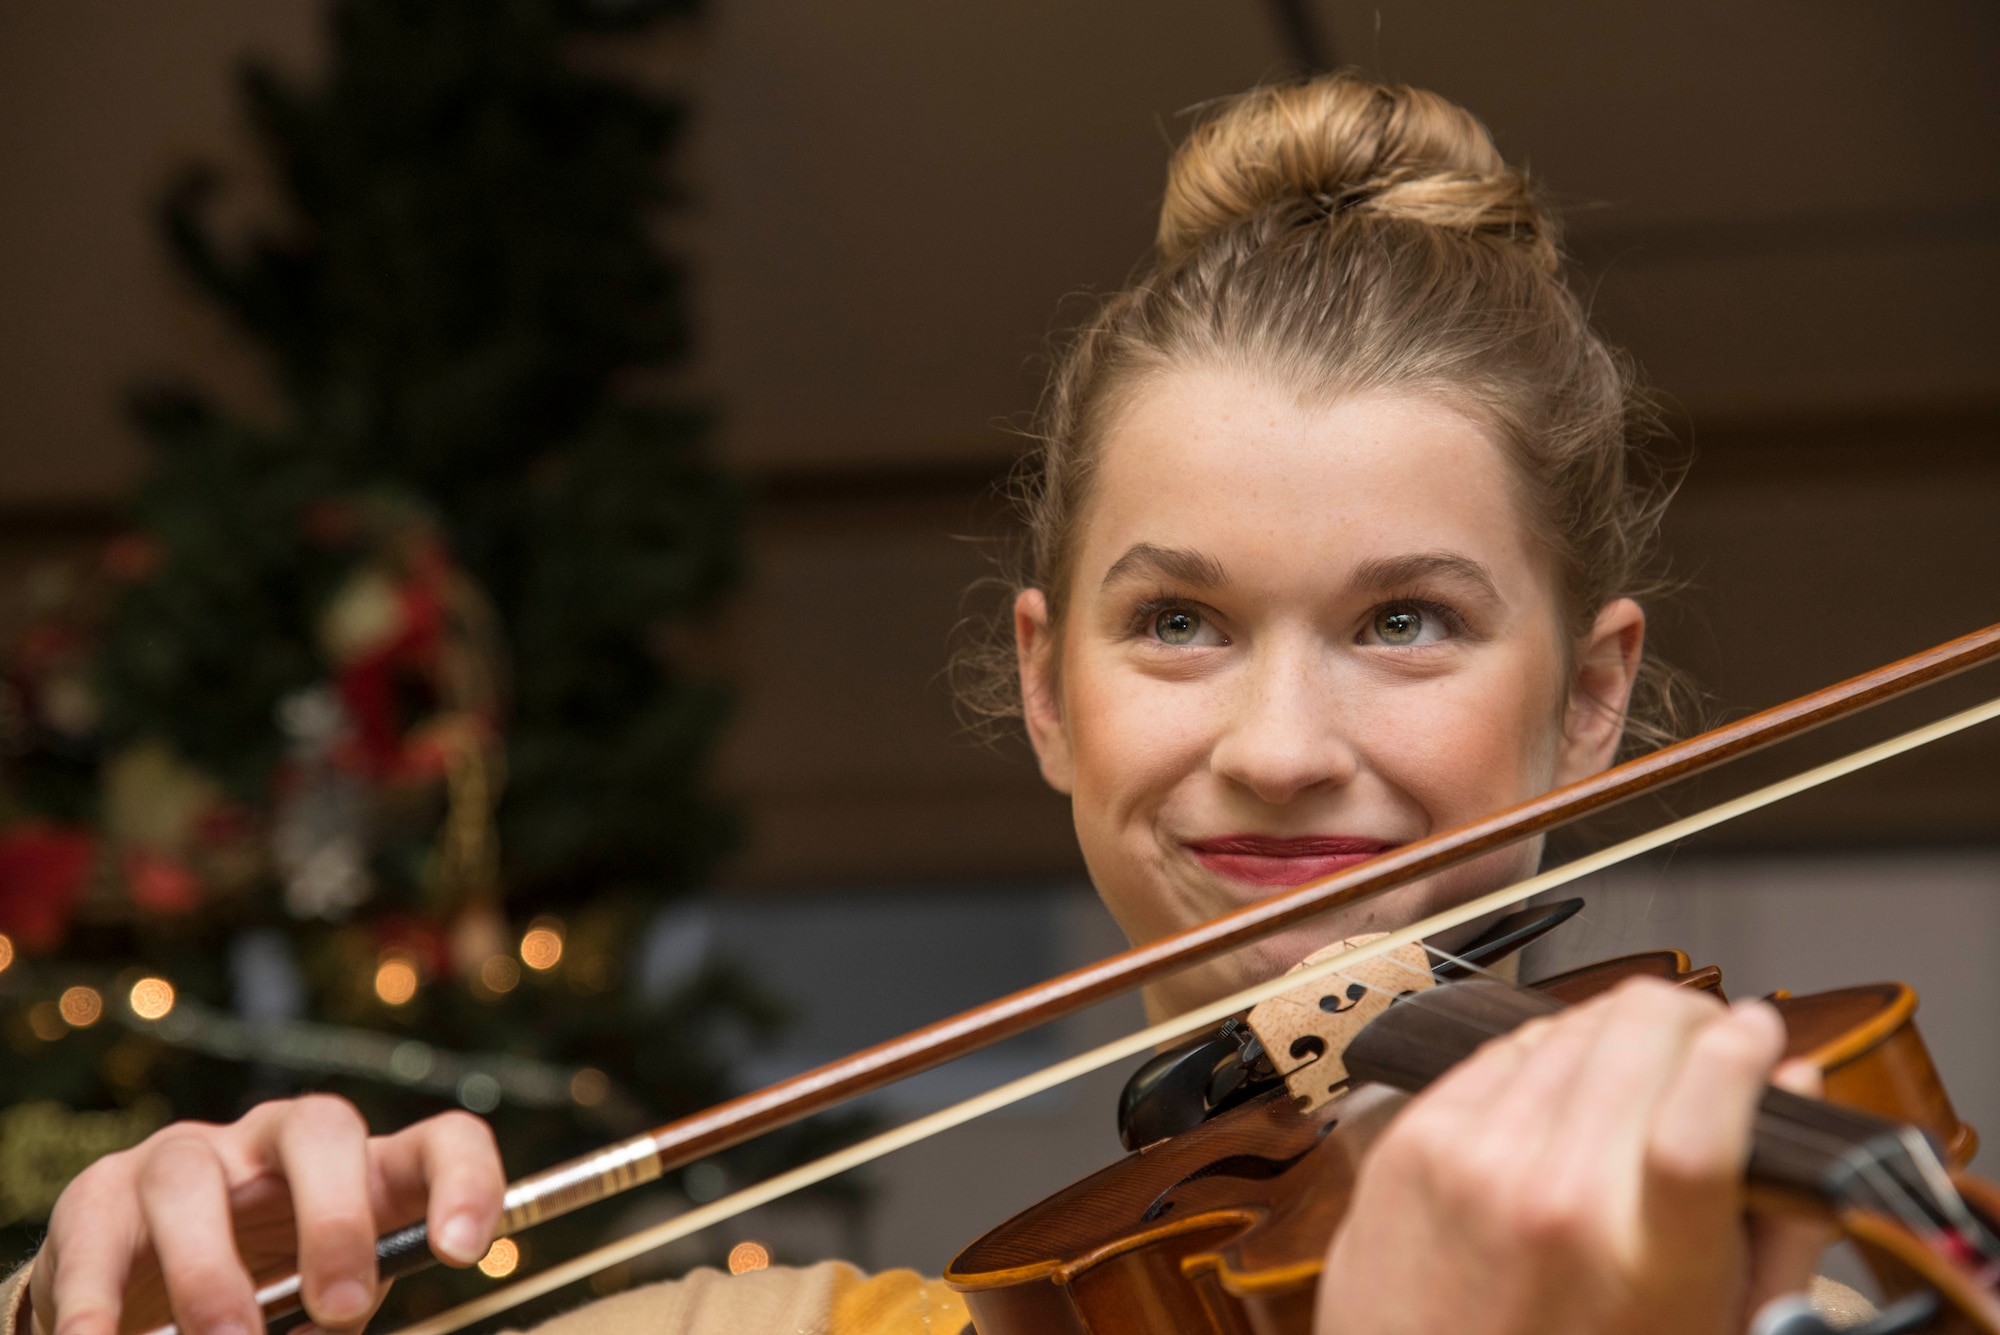 Leah Skaggs, daughter of Tech. Sgt. Erik Skaggs, the 35th Medical Group executive officer, plays the violin for Japanese elders at Harunaoka Old Age Home, Misawa City, Japan, Dec. 22, 2016. During their visit, Airmen and their families sang Christmas songs, gave gifts and played with the members. The Chapel and their groups visit the facility bi-monthly. (U.S. Air Force photo by Airman 1st Class Sadie Colbert)